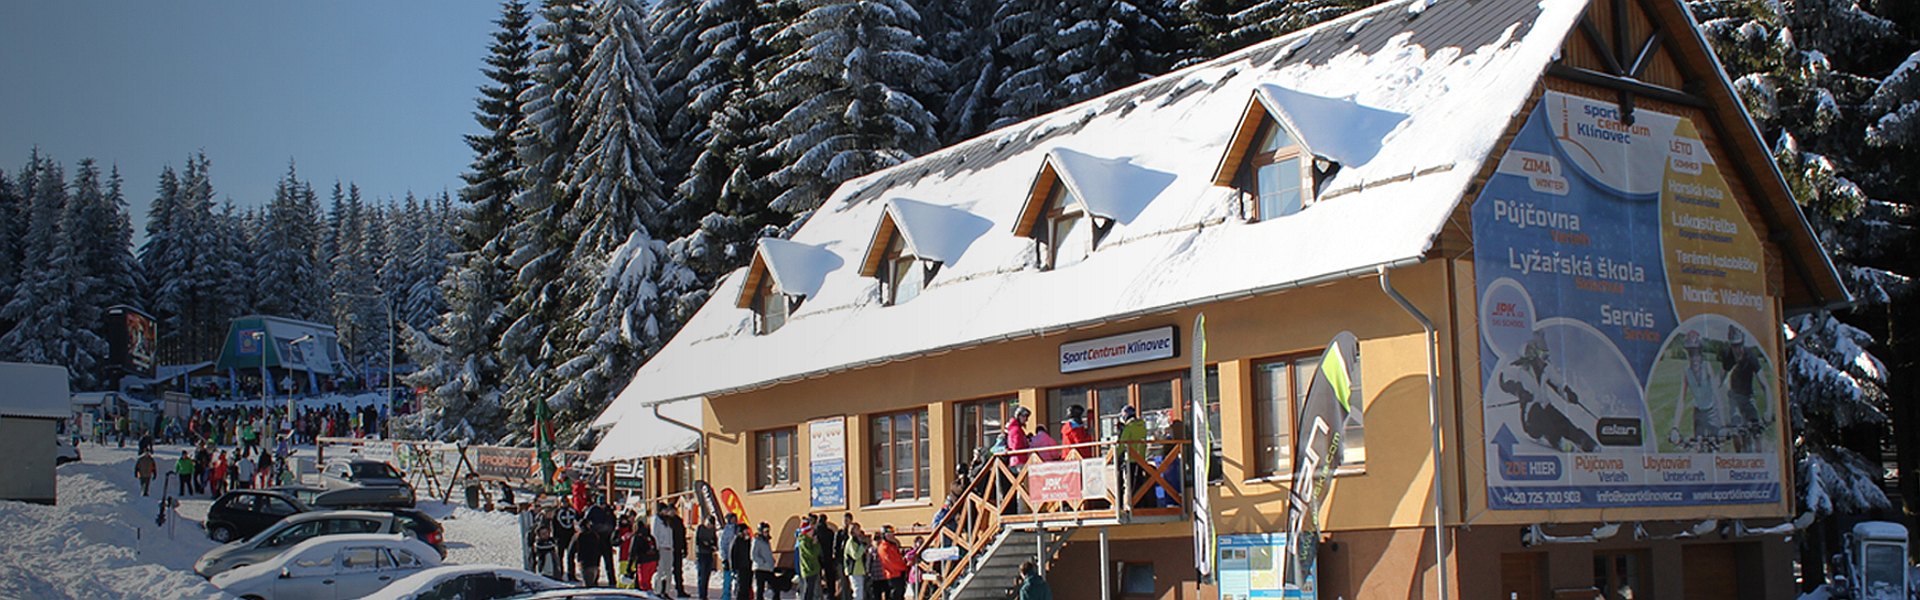 The largest ski and snowboard rental in Klinovec